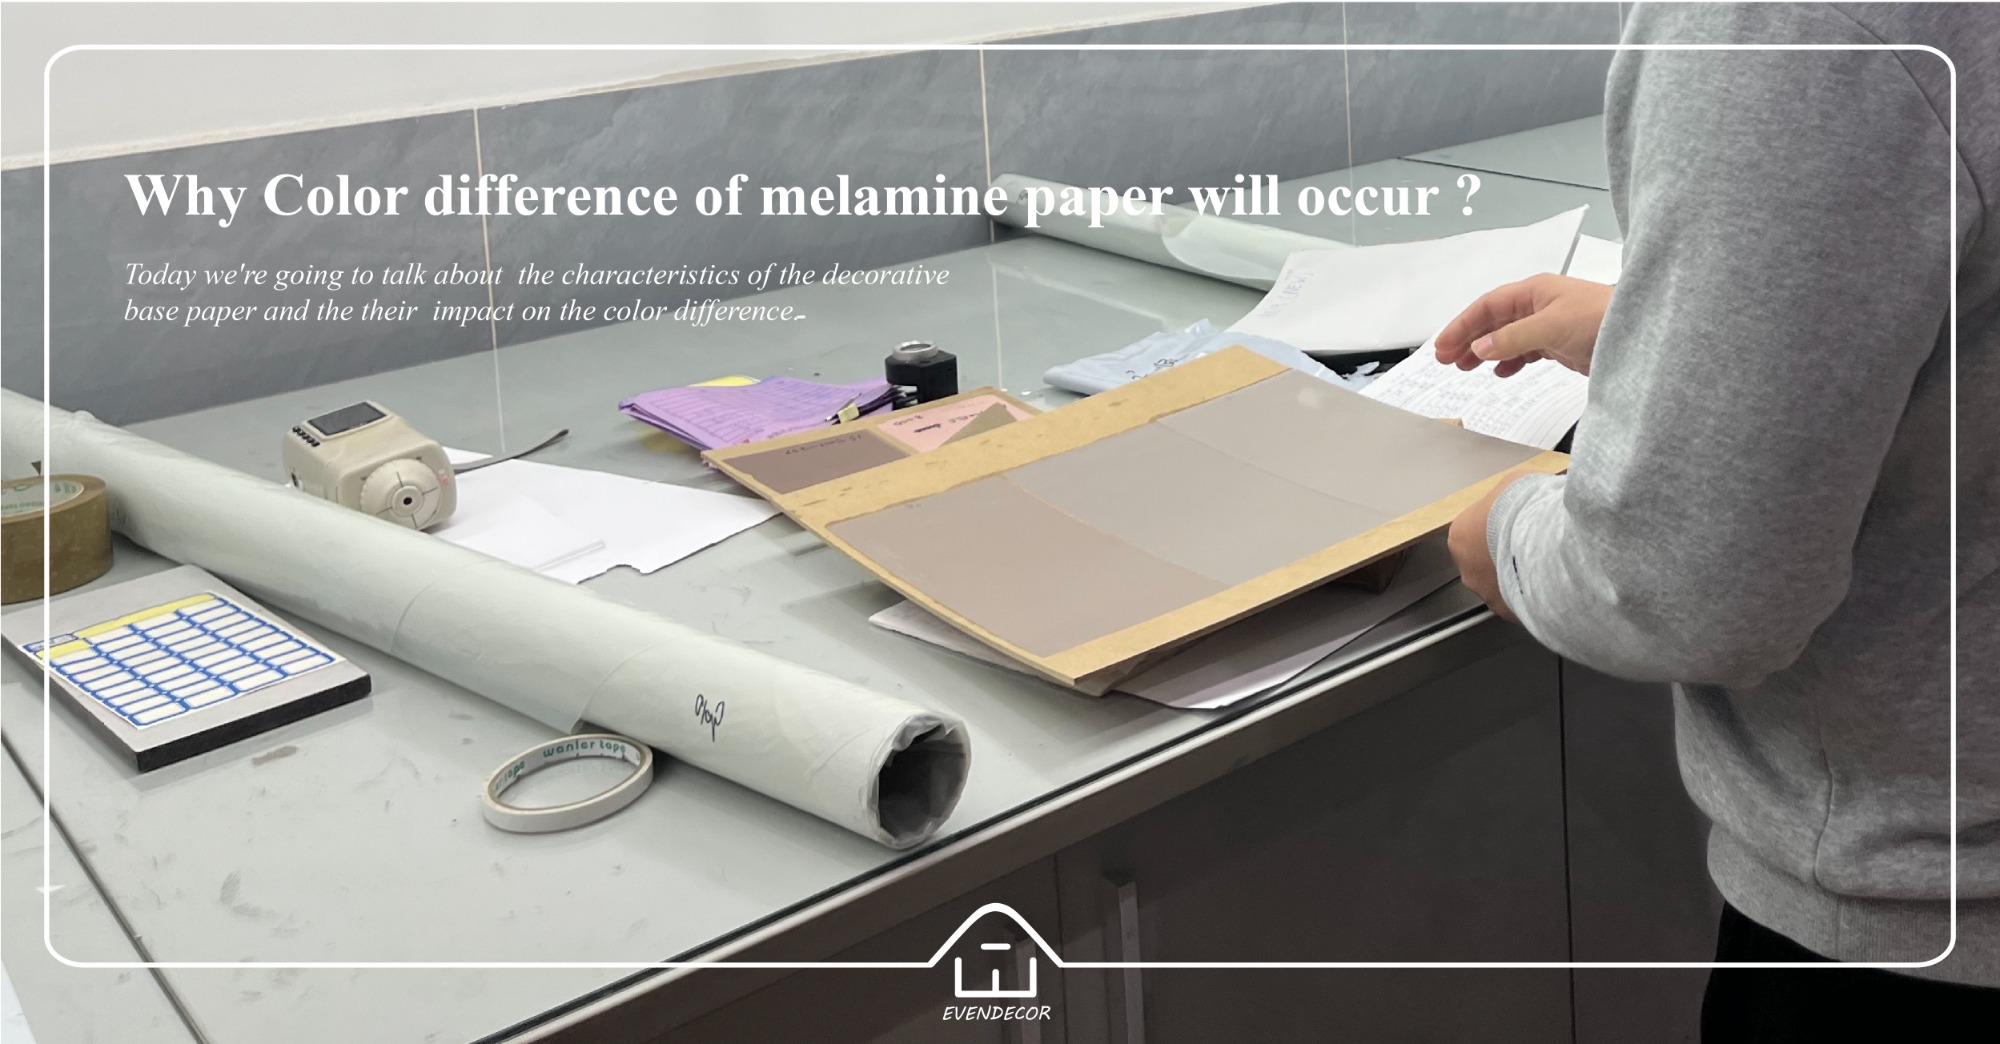 Why Color difference of melamine paper will occur?